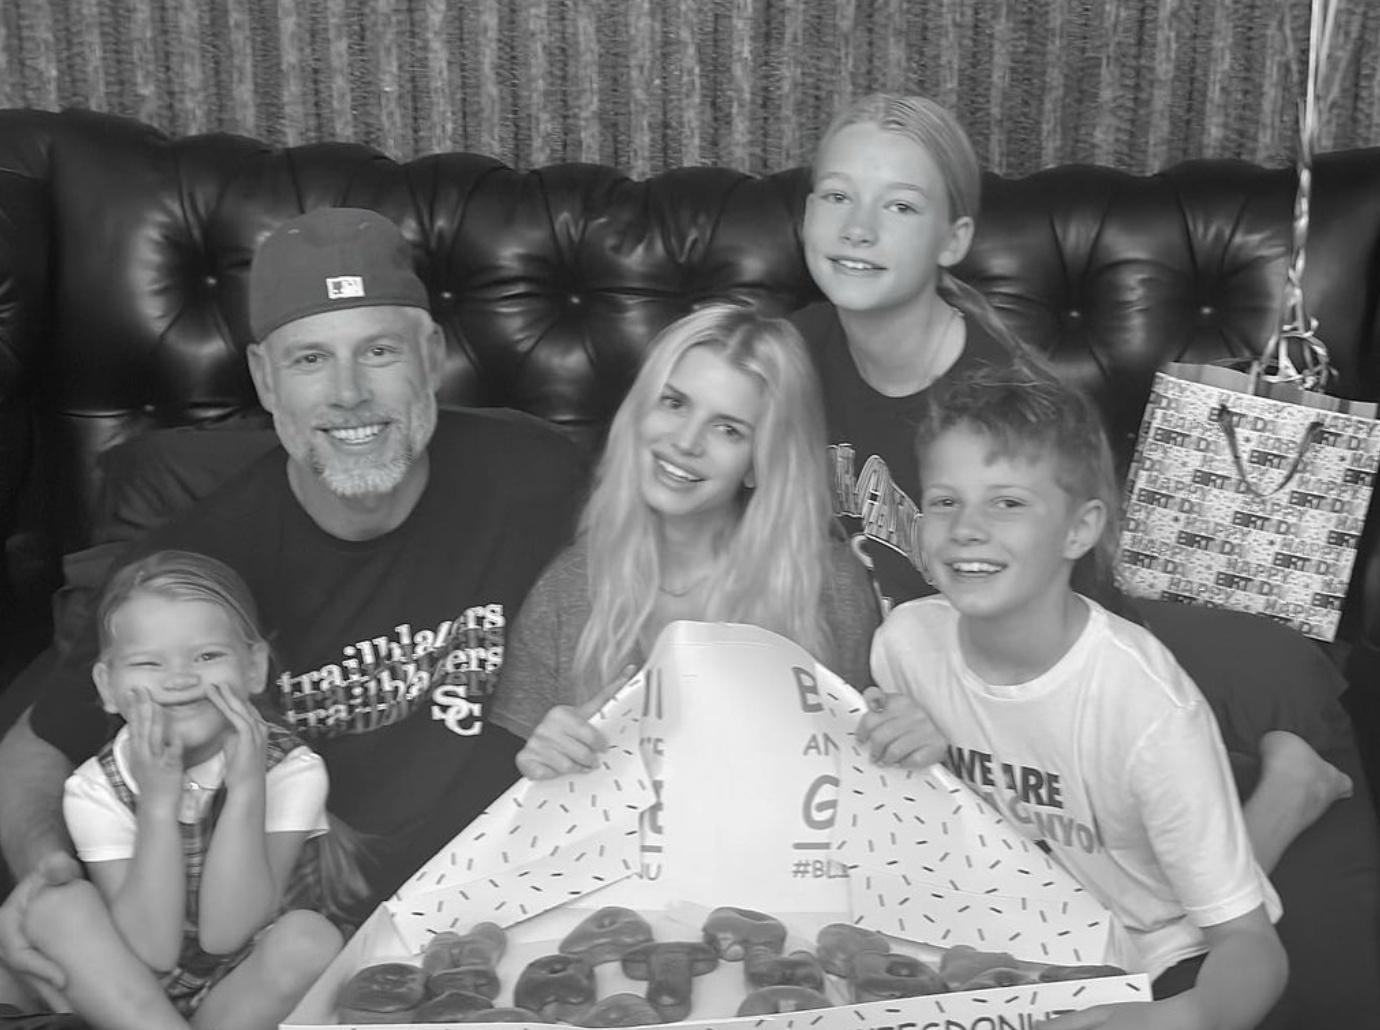 February 4, 2020, New York, New York, USA: Singer/actress/ personality JESSICA  SIMPSON with her family ERIC JOHNSON, BIRDIE MAE JOHNSON, ACE KNUTE JOHNSON  and MAXWELL DREW JOHNSON, where she promoted her new